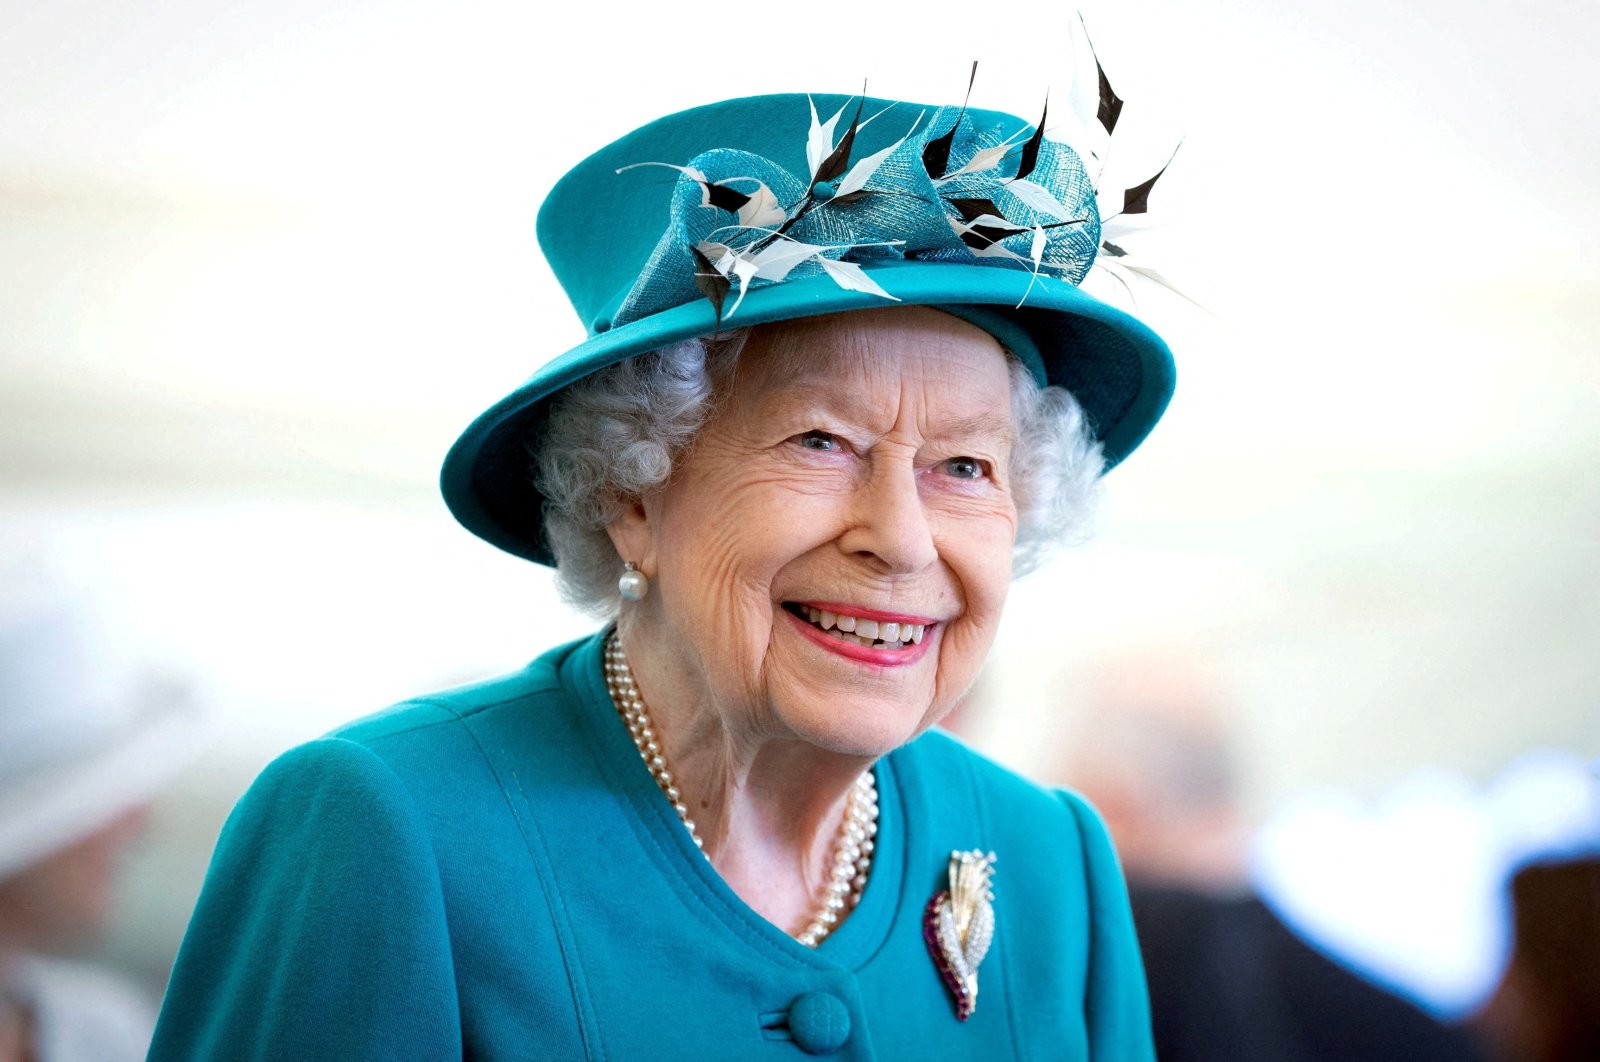 Long live the queen: UK set to honor monarch's 70 years on throne